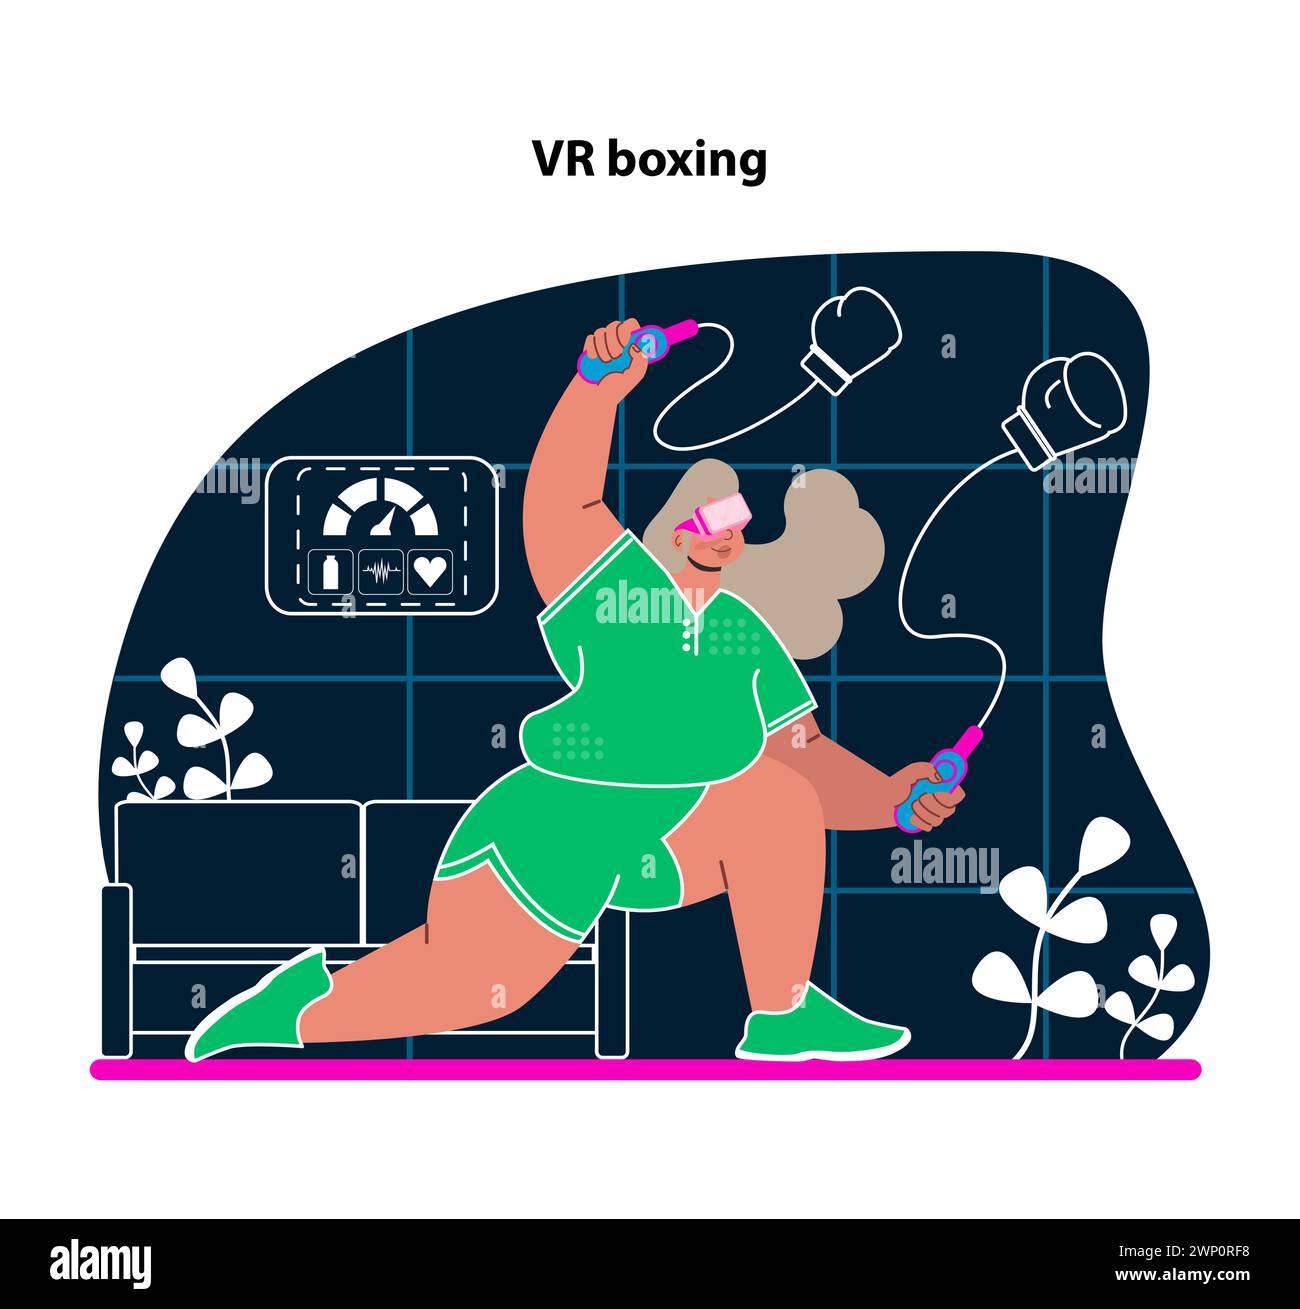 VR boxing. Punch and weave with virtual reality boxing sessions. Engage in high-energy workouts from anywhere. Digital fitness that packs a punch. Flat vector illustration. Stock Vector